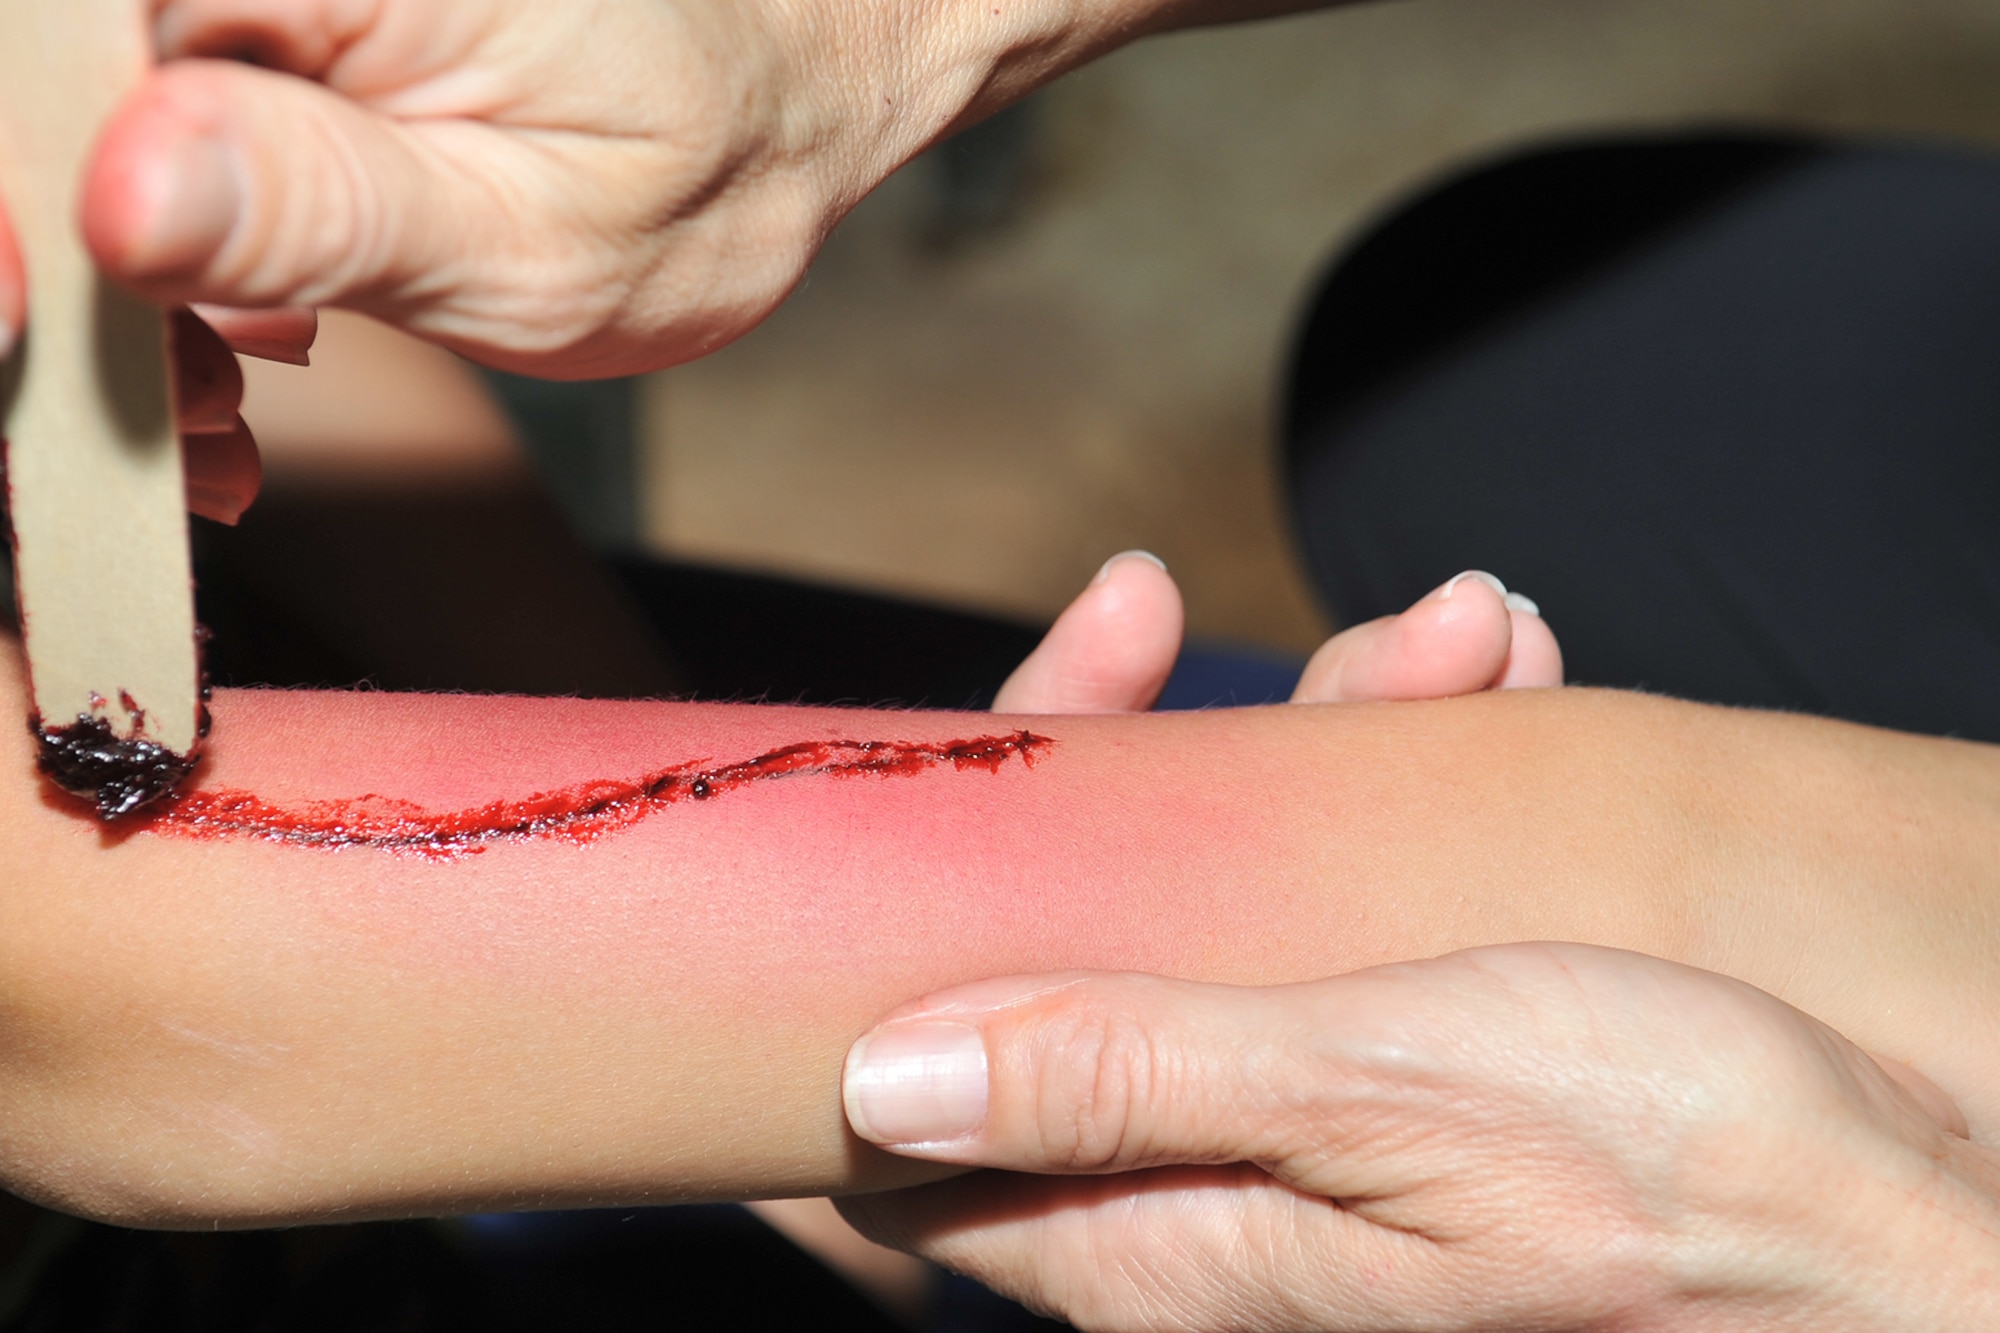 Cecilia Diaz, 17th Medical Group Family Advocacy outreach manager, paints a child’s arm to look like an injury during Operation Kids Investigating Deployment Services at Camp Sentinel, Goodfellow Air Force Base, Texas, Oct. 1, 2016. The wound painting technique is called moulage and is used for the purpose of training emergency response teams and other medical and military personnel. (U.S. Air Force photo by Staff Sgt. Laura R. McFarlane/Released)